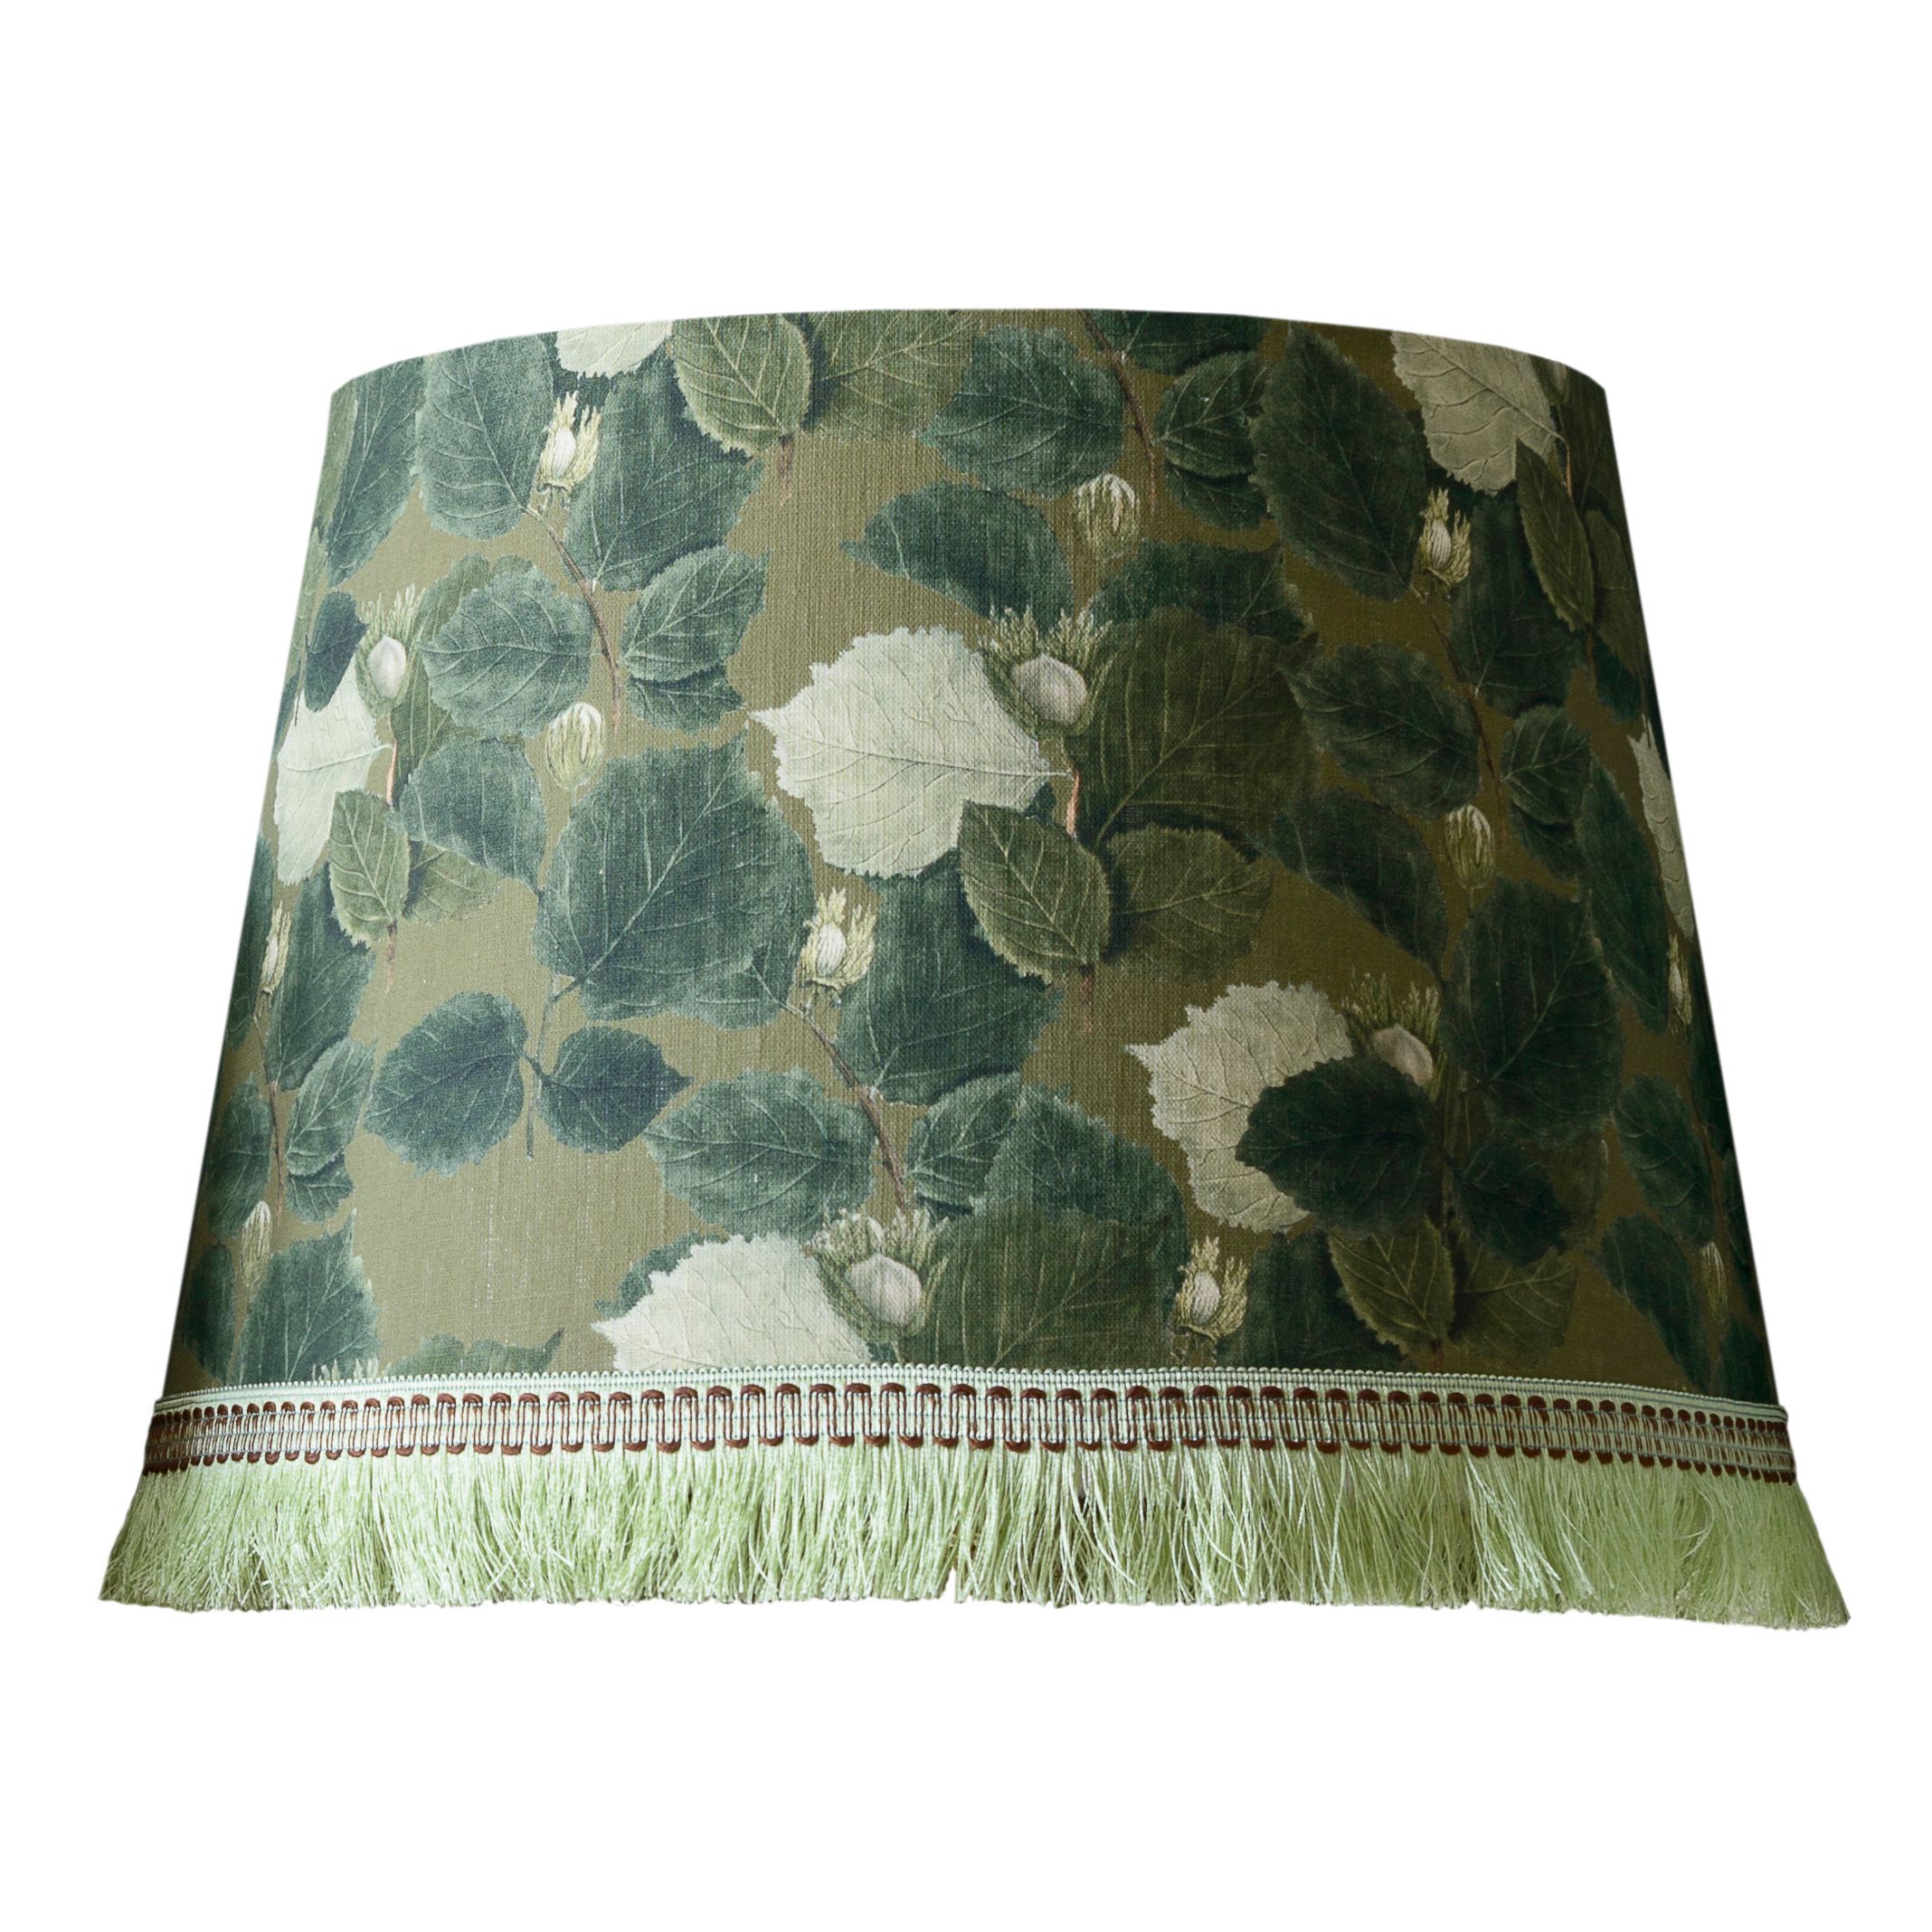 COUNTRY FLOWERS Lampshade 35cm x 45cm x Height 30cm